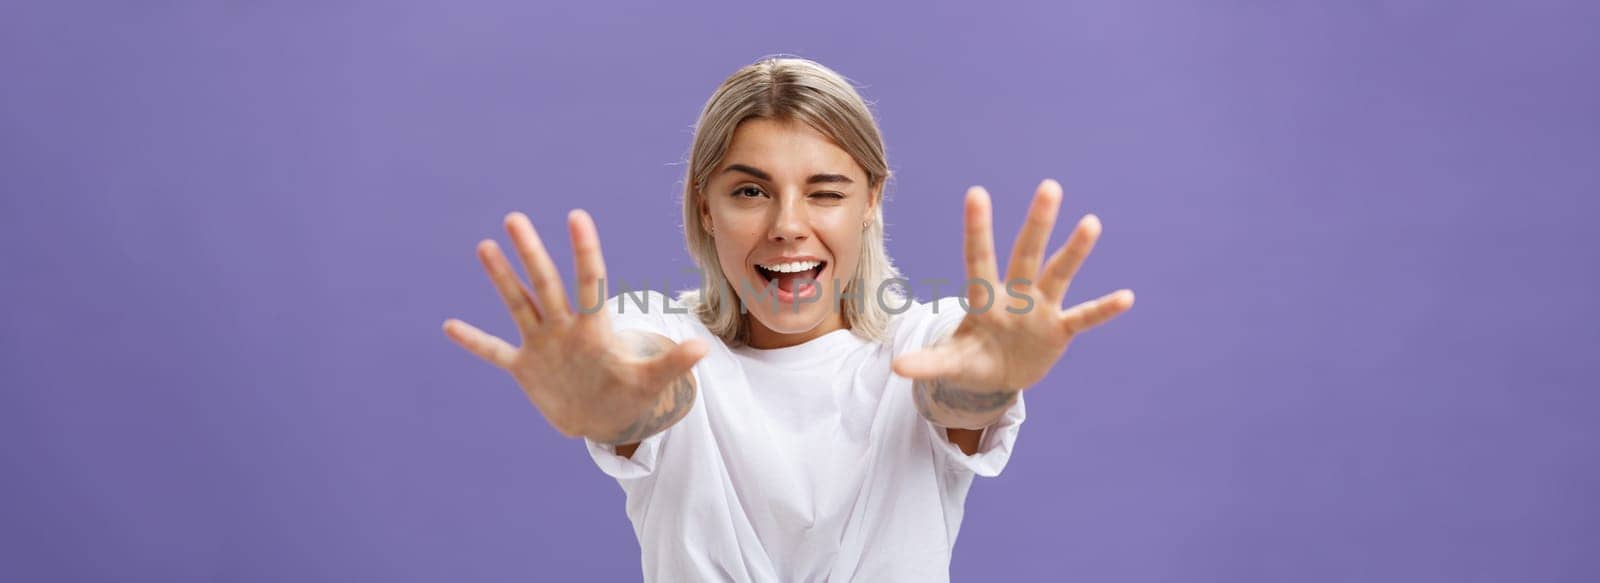 Reaching to you. Portrait of flirty good-looking and confident stylish woman with tattoos on arms winking sticking out tongue playfully and smiling pulling hands towards camera over purple background. Emotions and body language concept